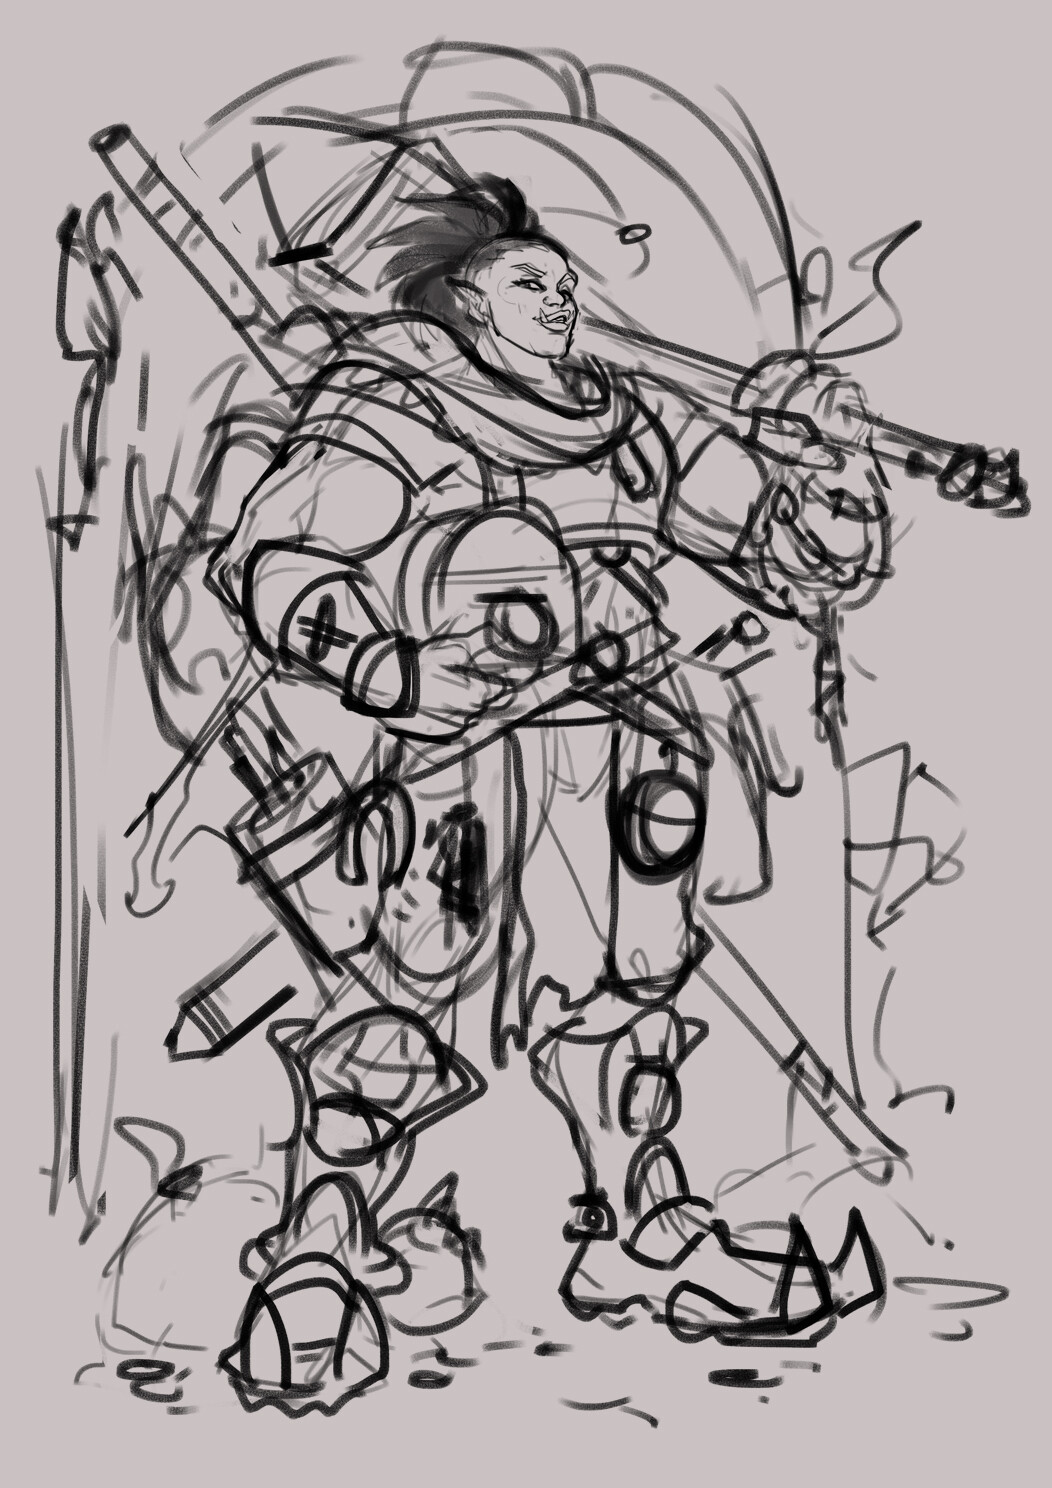 Initial rough. The design for this character came together really quickly, only the balance and composition of the elements needed adjusting